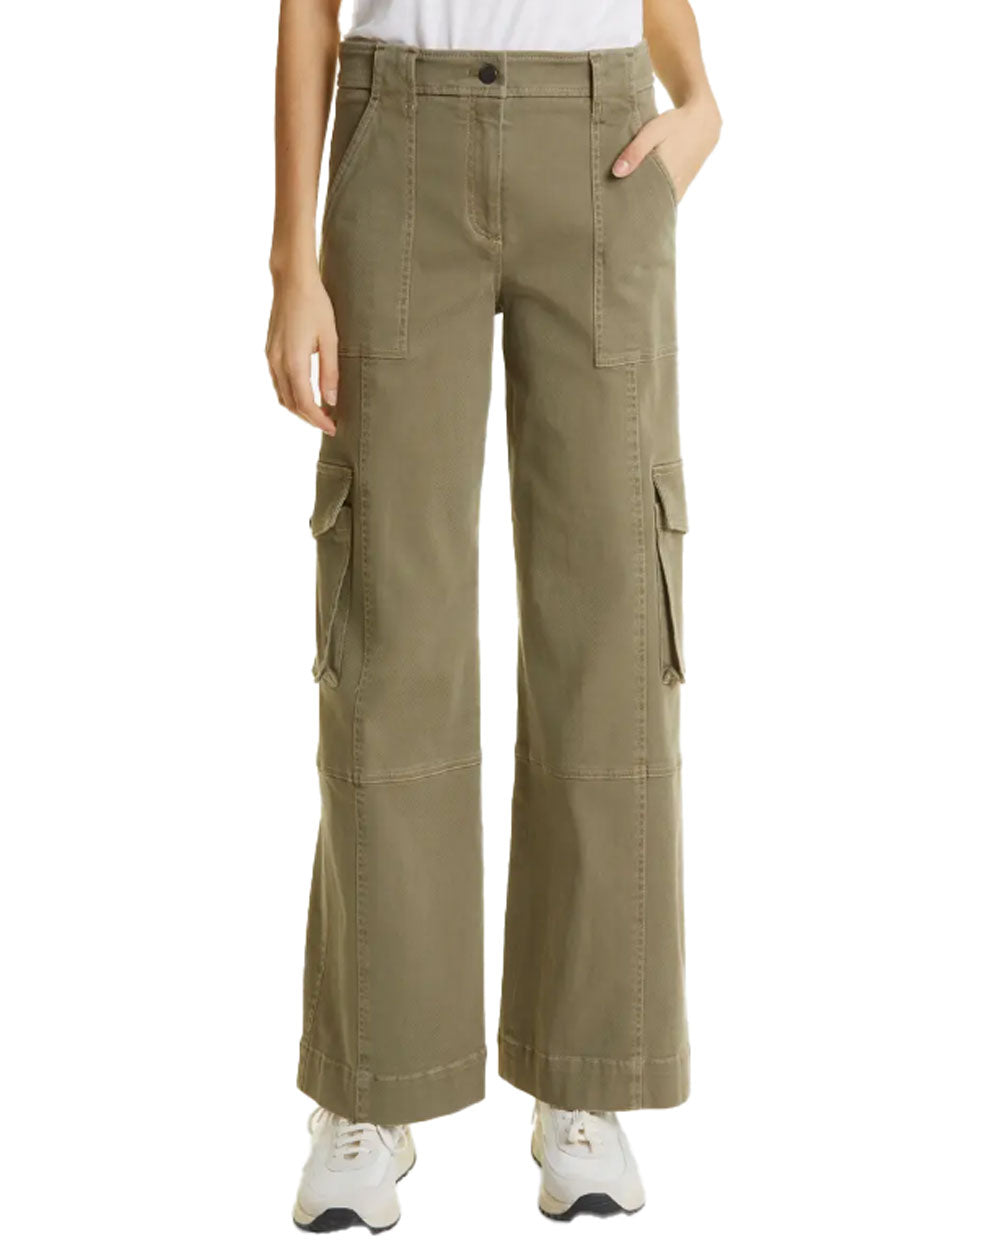 Dark Olive Coop Pant with Cargo Pockets